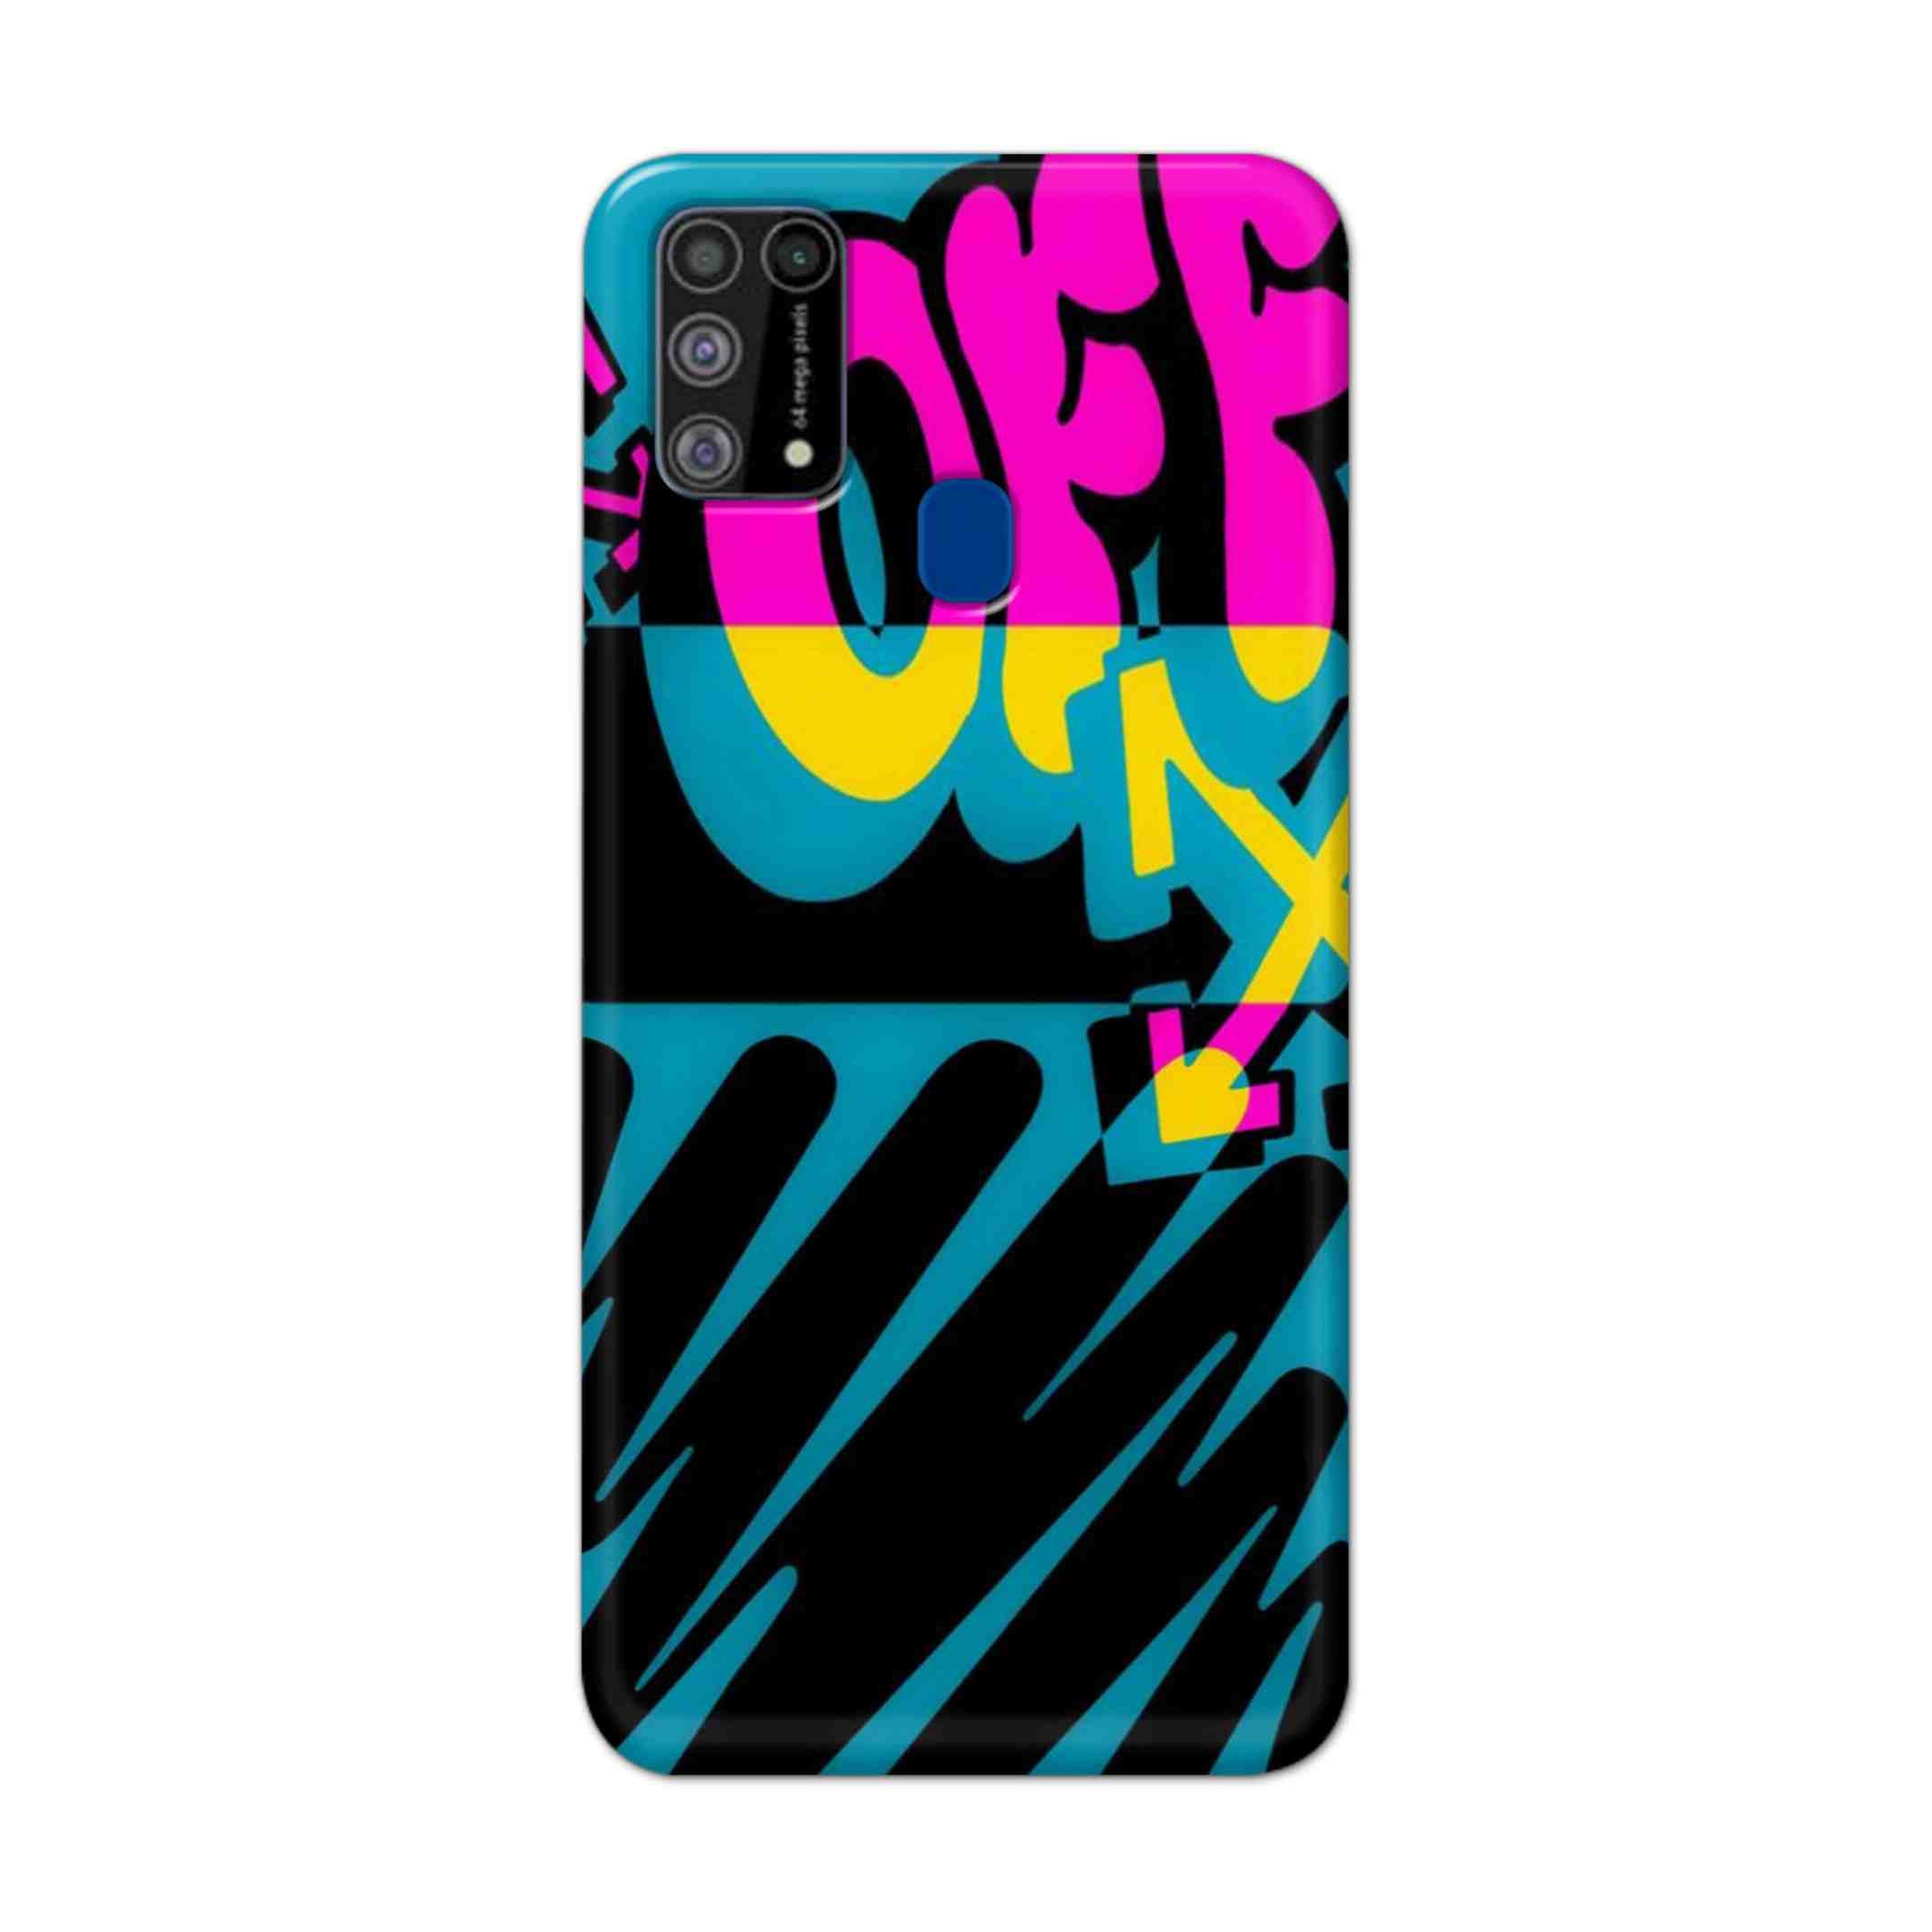 Buy Off Hard Back Mobile Phone Case Cover For Samsung Galaxy M31 Online